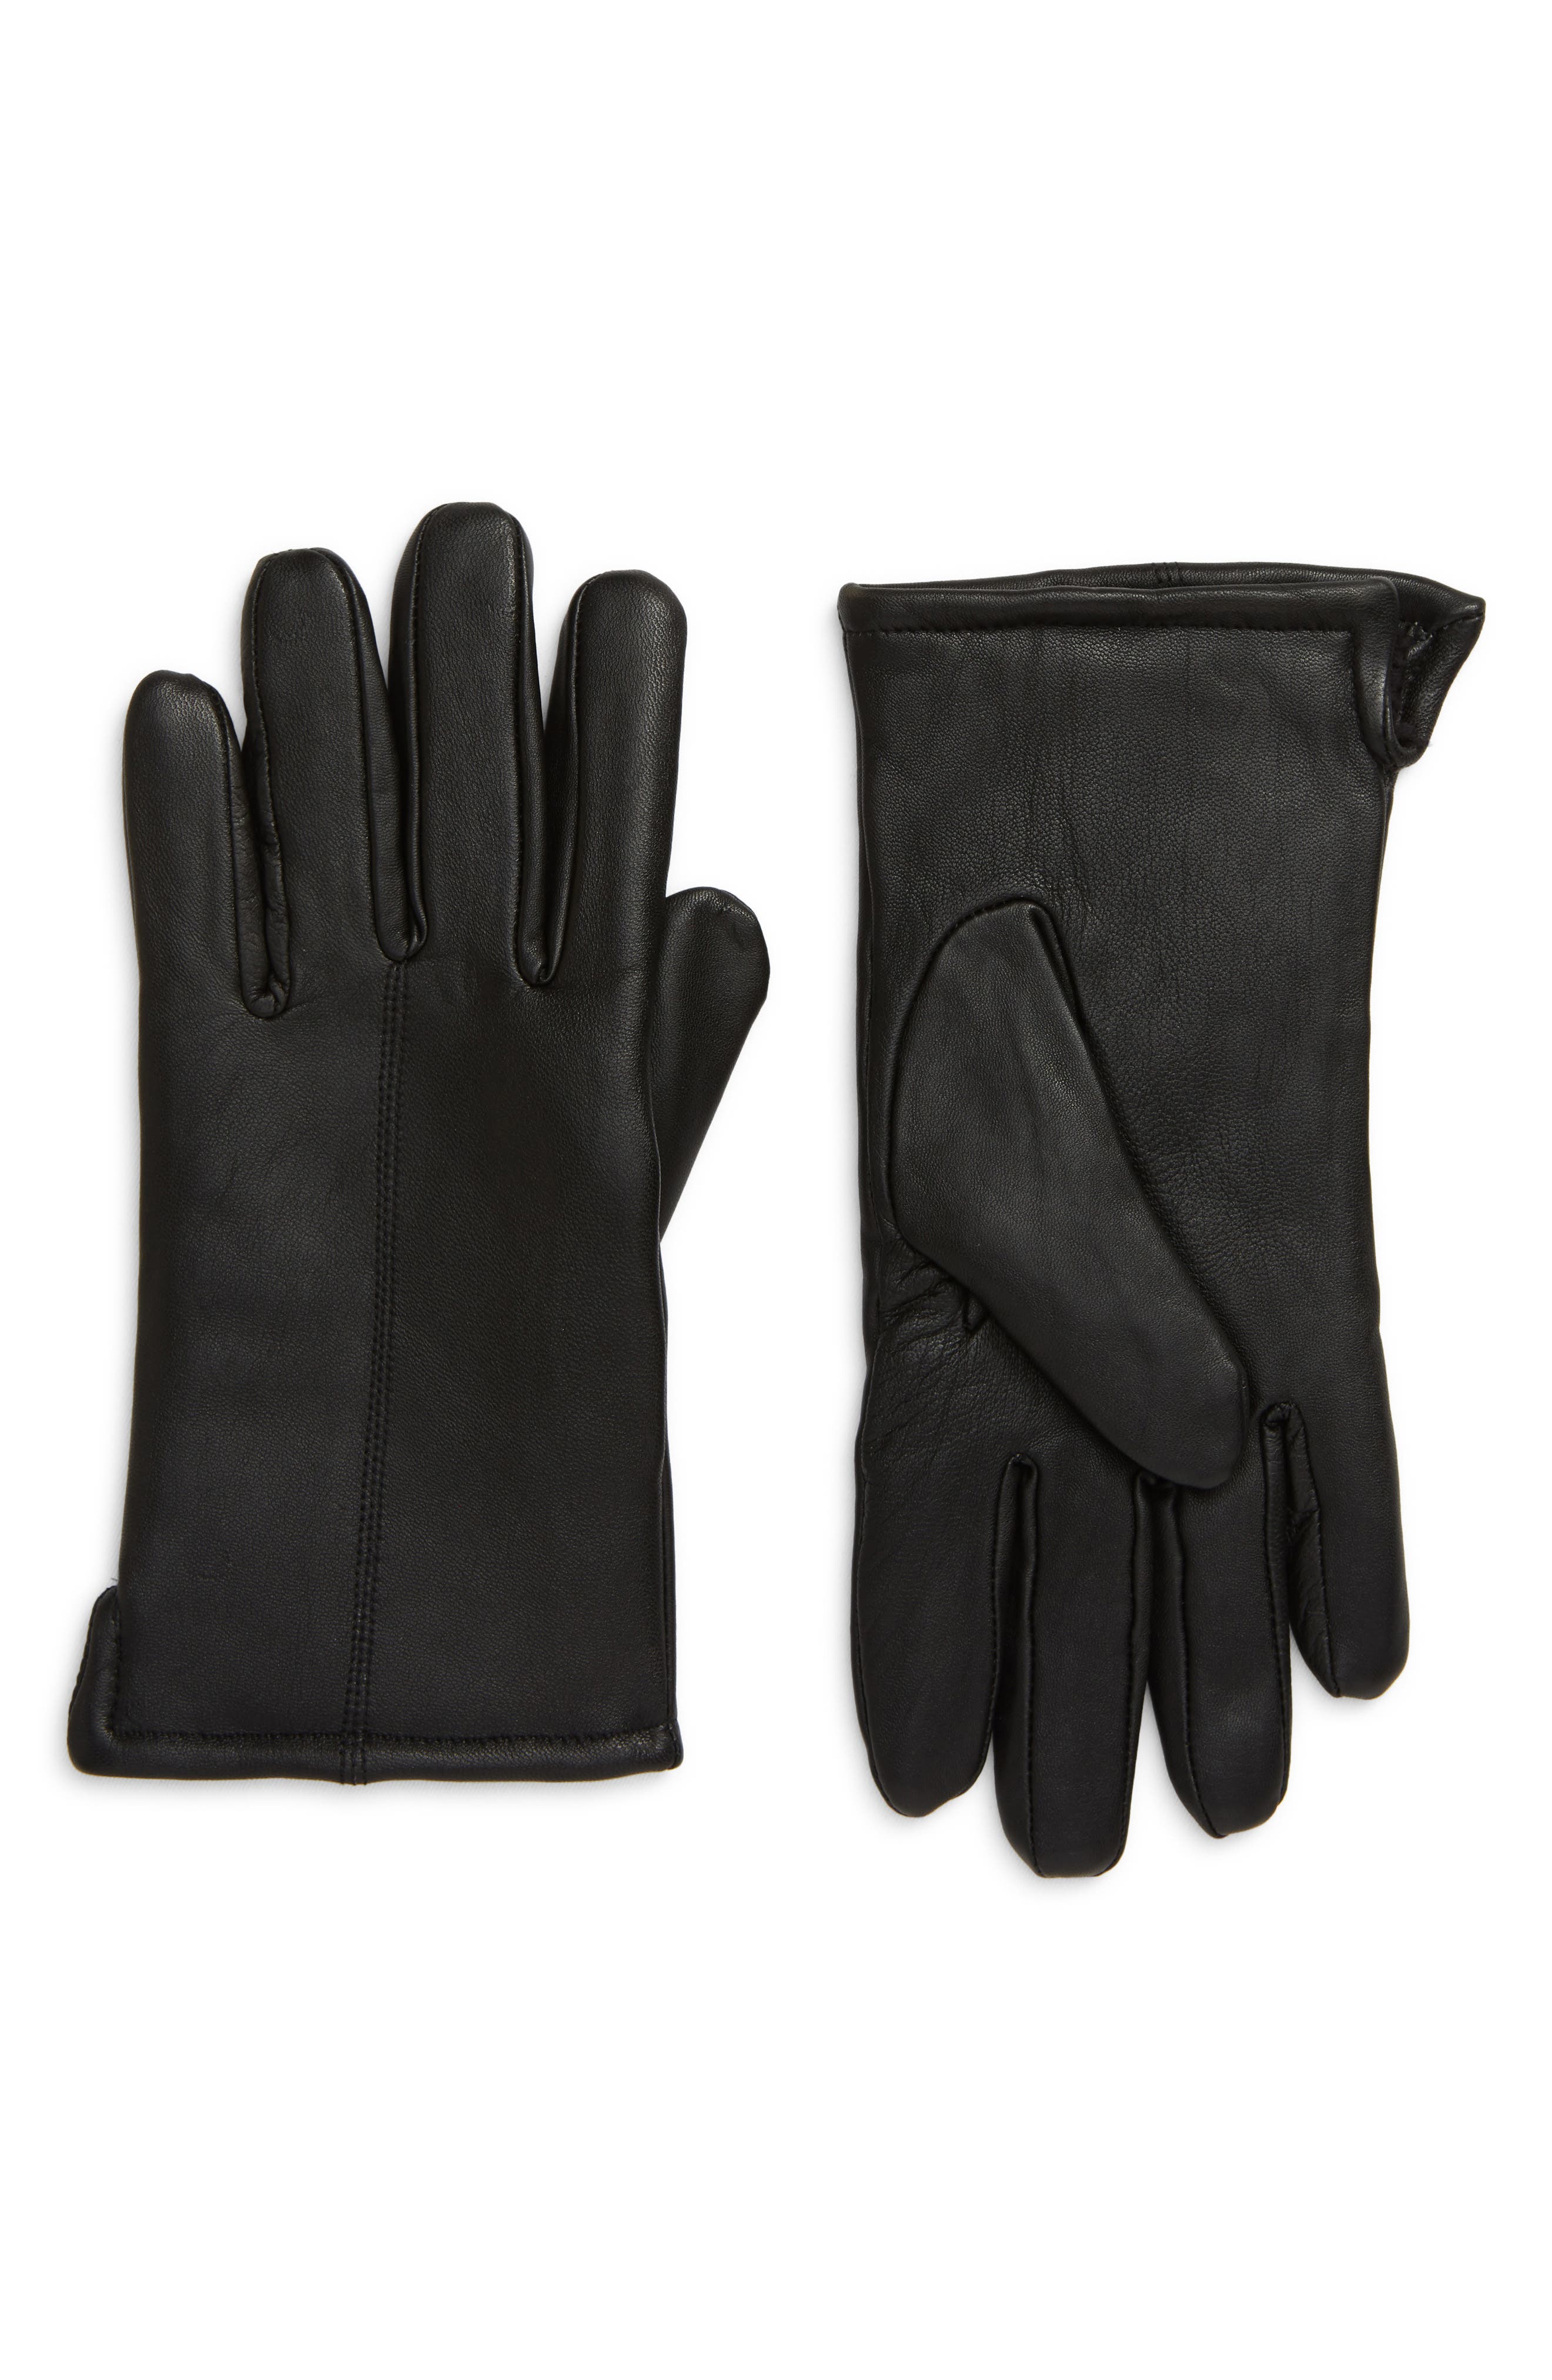 Fila Synthetic Coney Gloves Black for Men Mens Accessories Gloves 